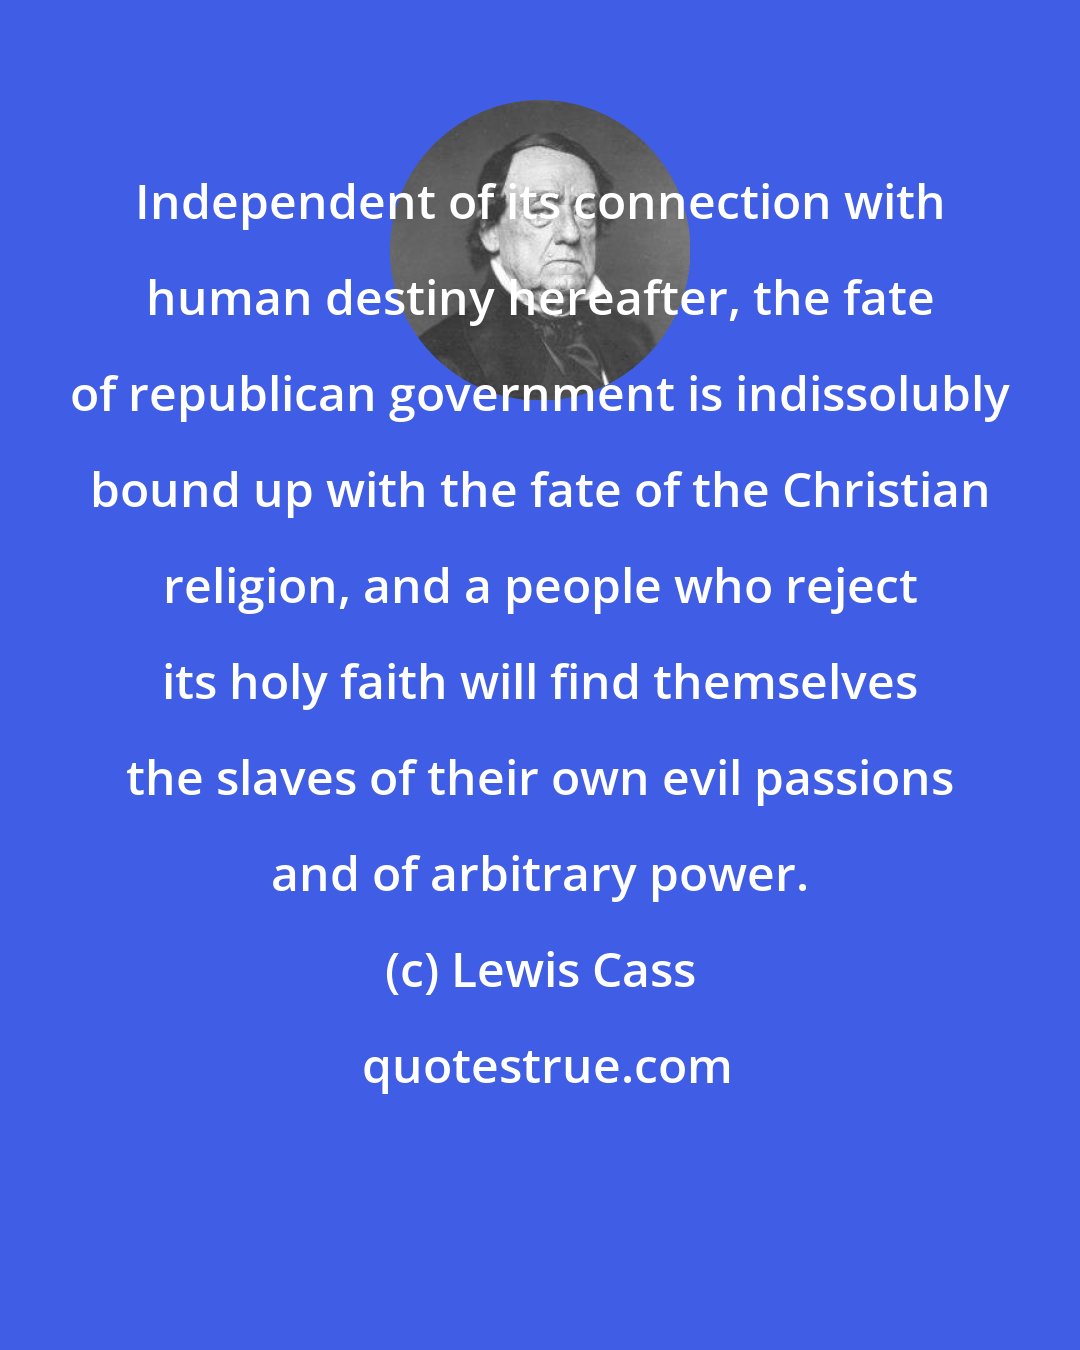 Lewis Cass: Independent of its connection with human destiny hereafter, the fate of republican government is indissolubly bound up with the fate of the Christian religion, and a people who reject its holy faith will find themselves the slaves of their own evil passions and of arbitrary power.